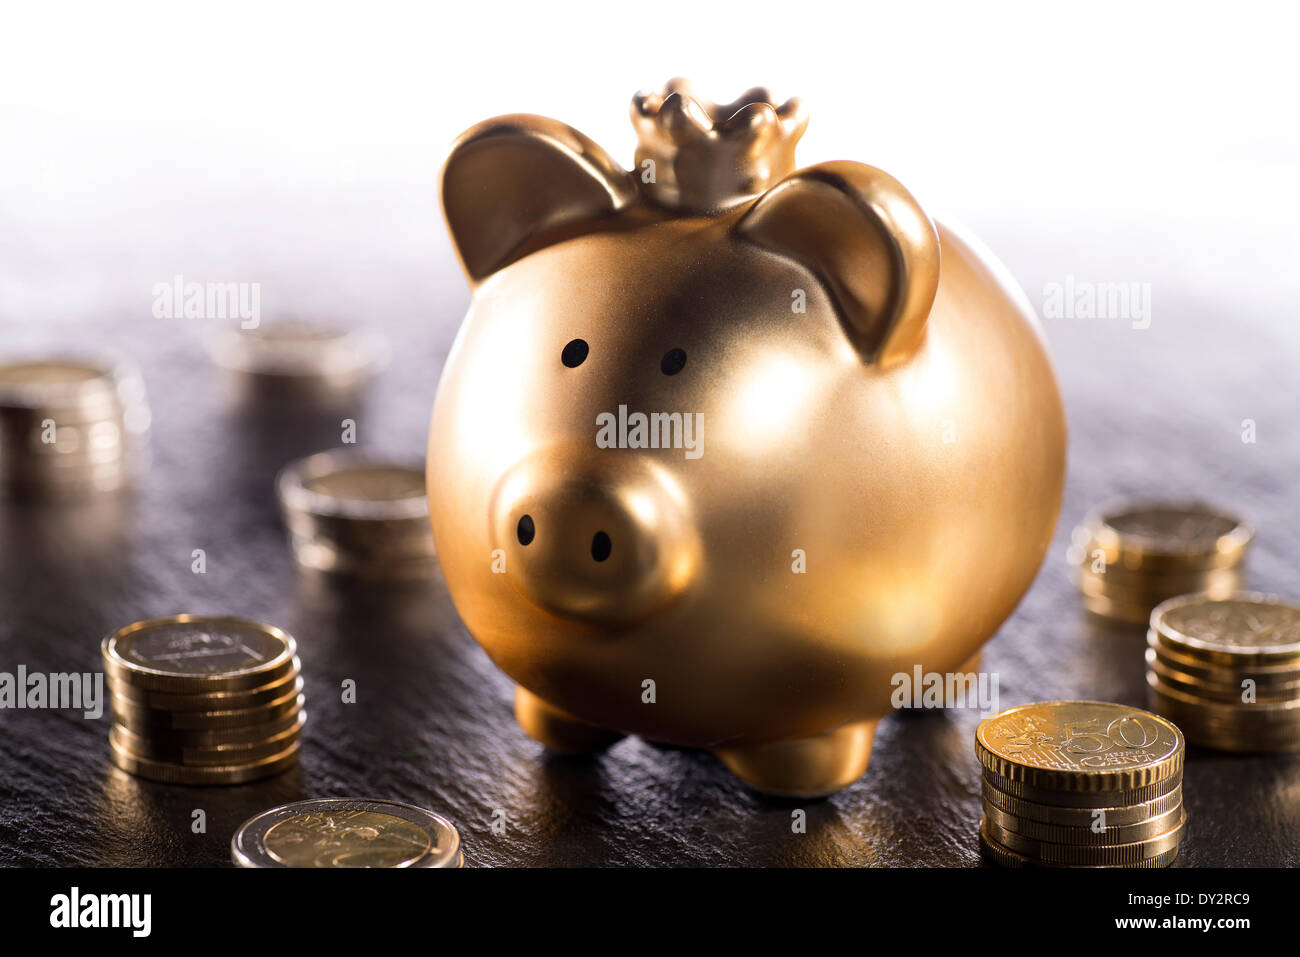 Golden piggy bank with crown is surrounded by coins. March 2014 Stock Photo